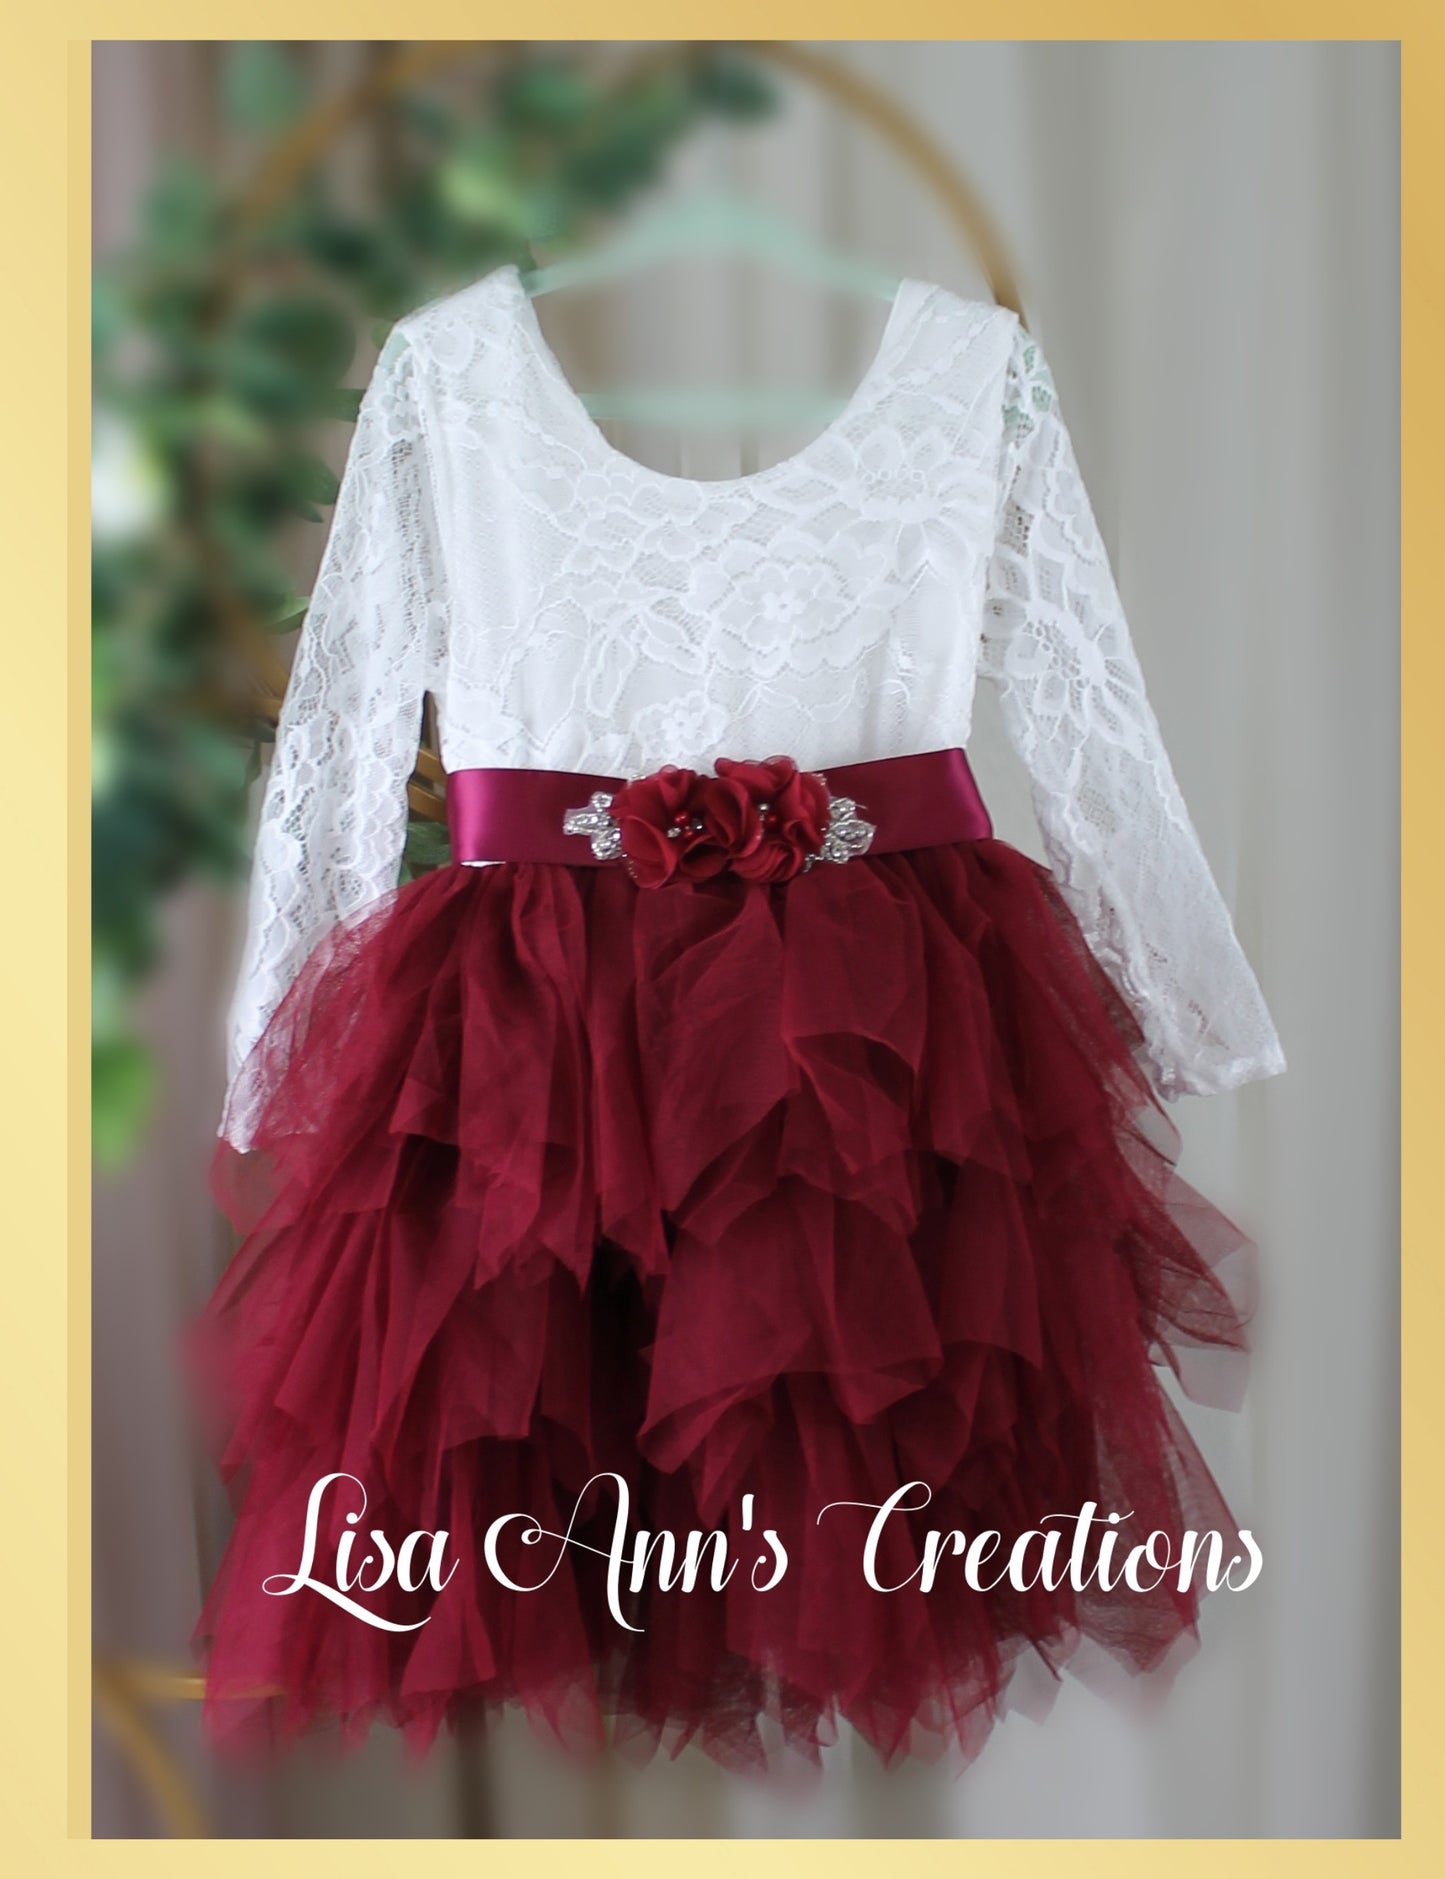 Flower girl dress in burgundy tulle with white lace